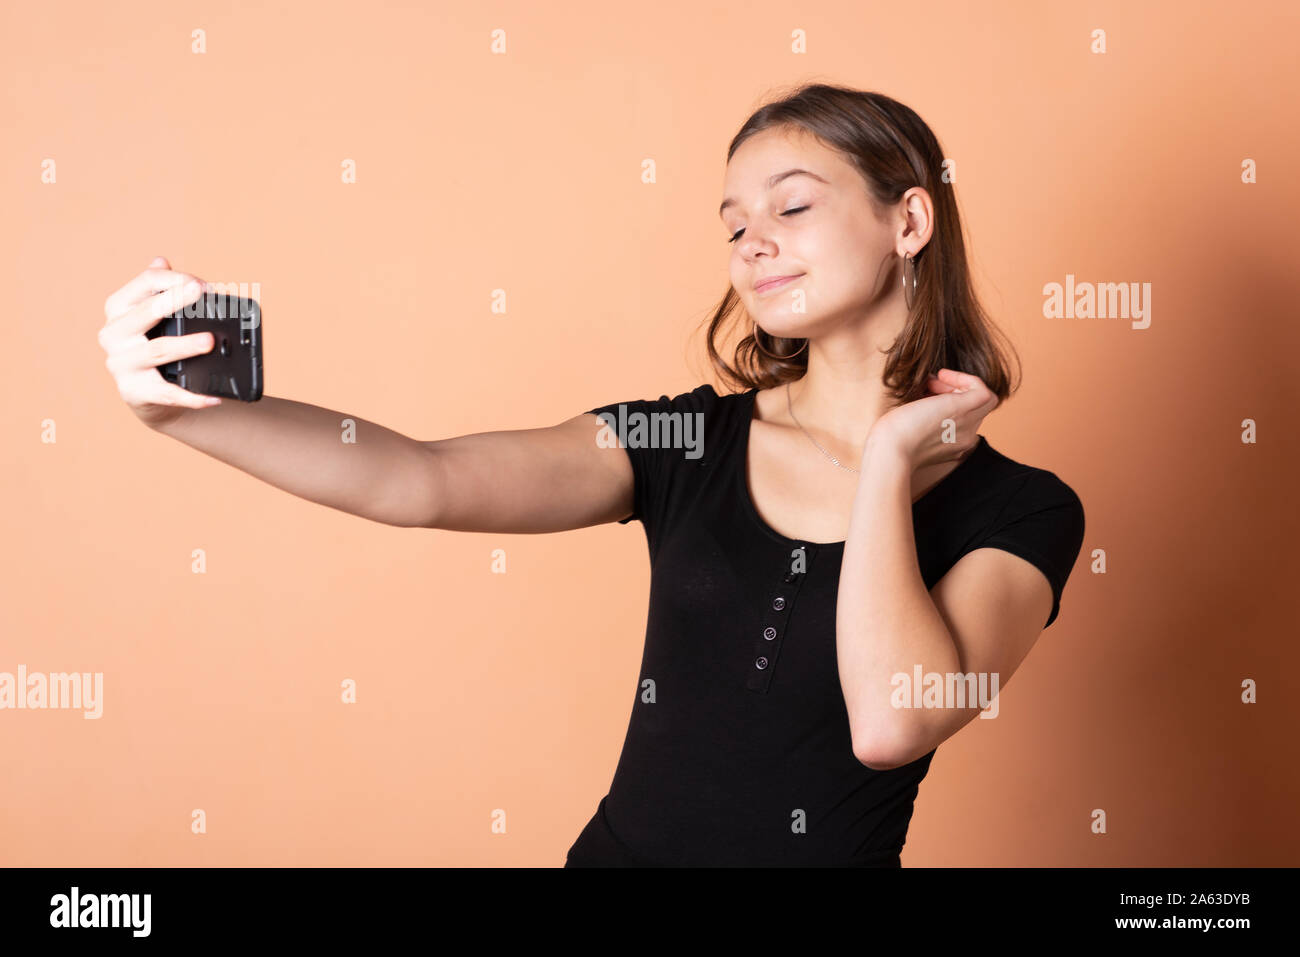 Little girl takes a selfie, on a light orange background. Stock Photo